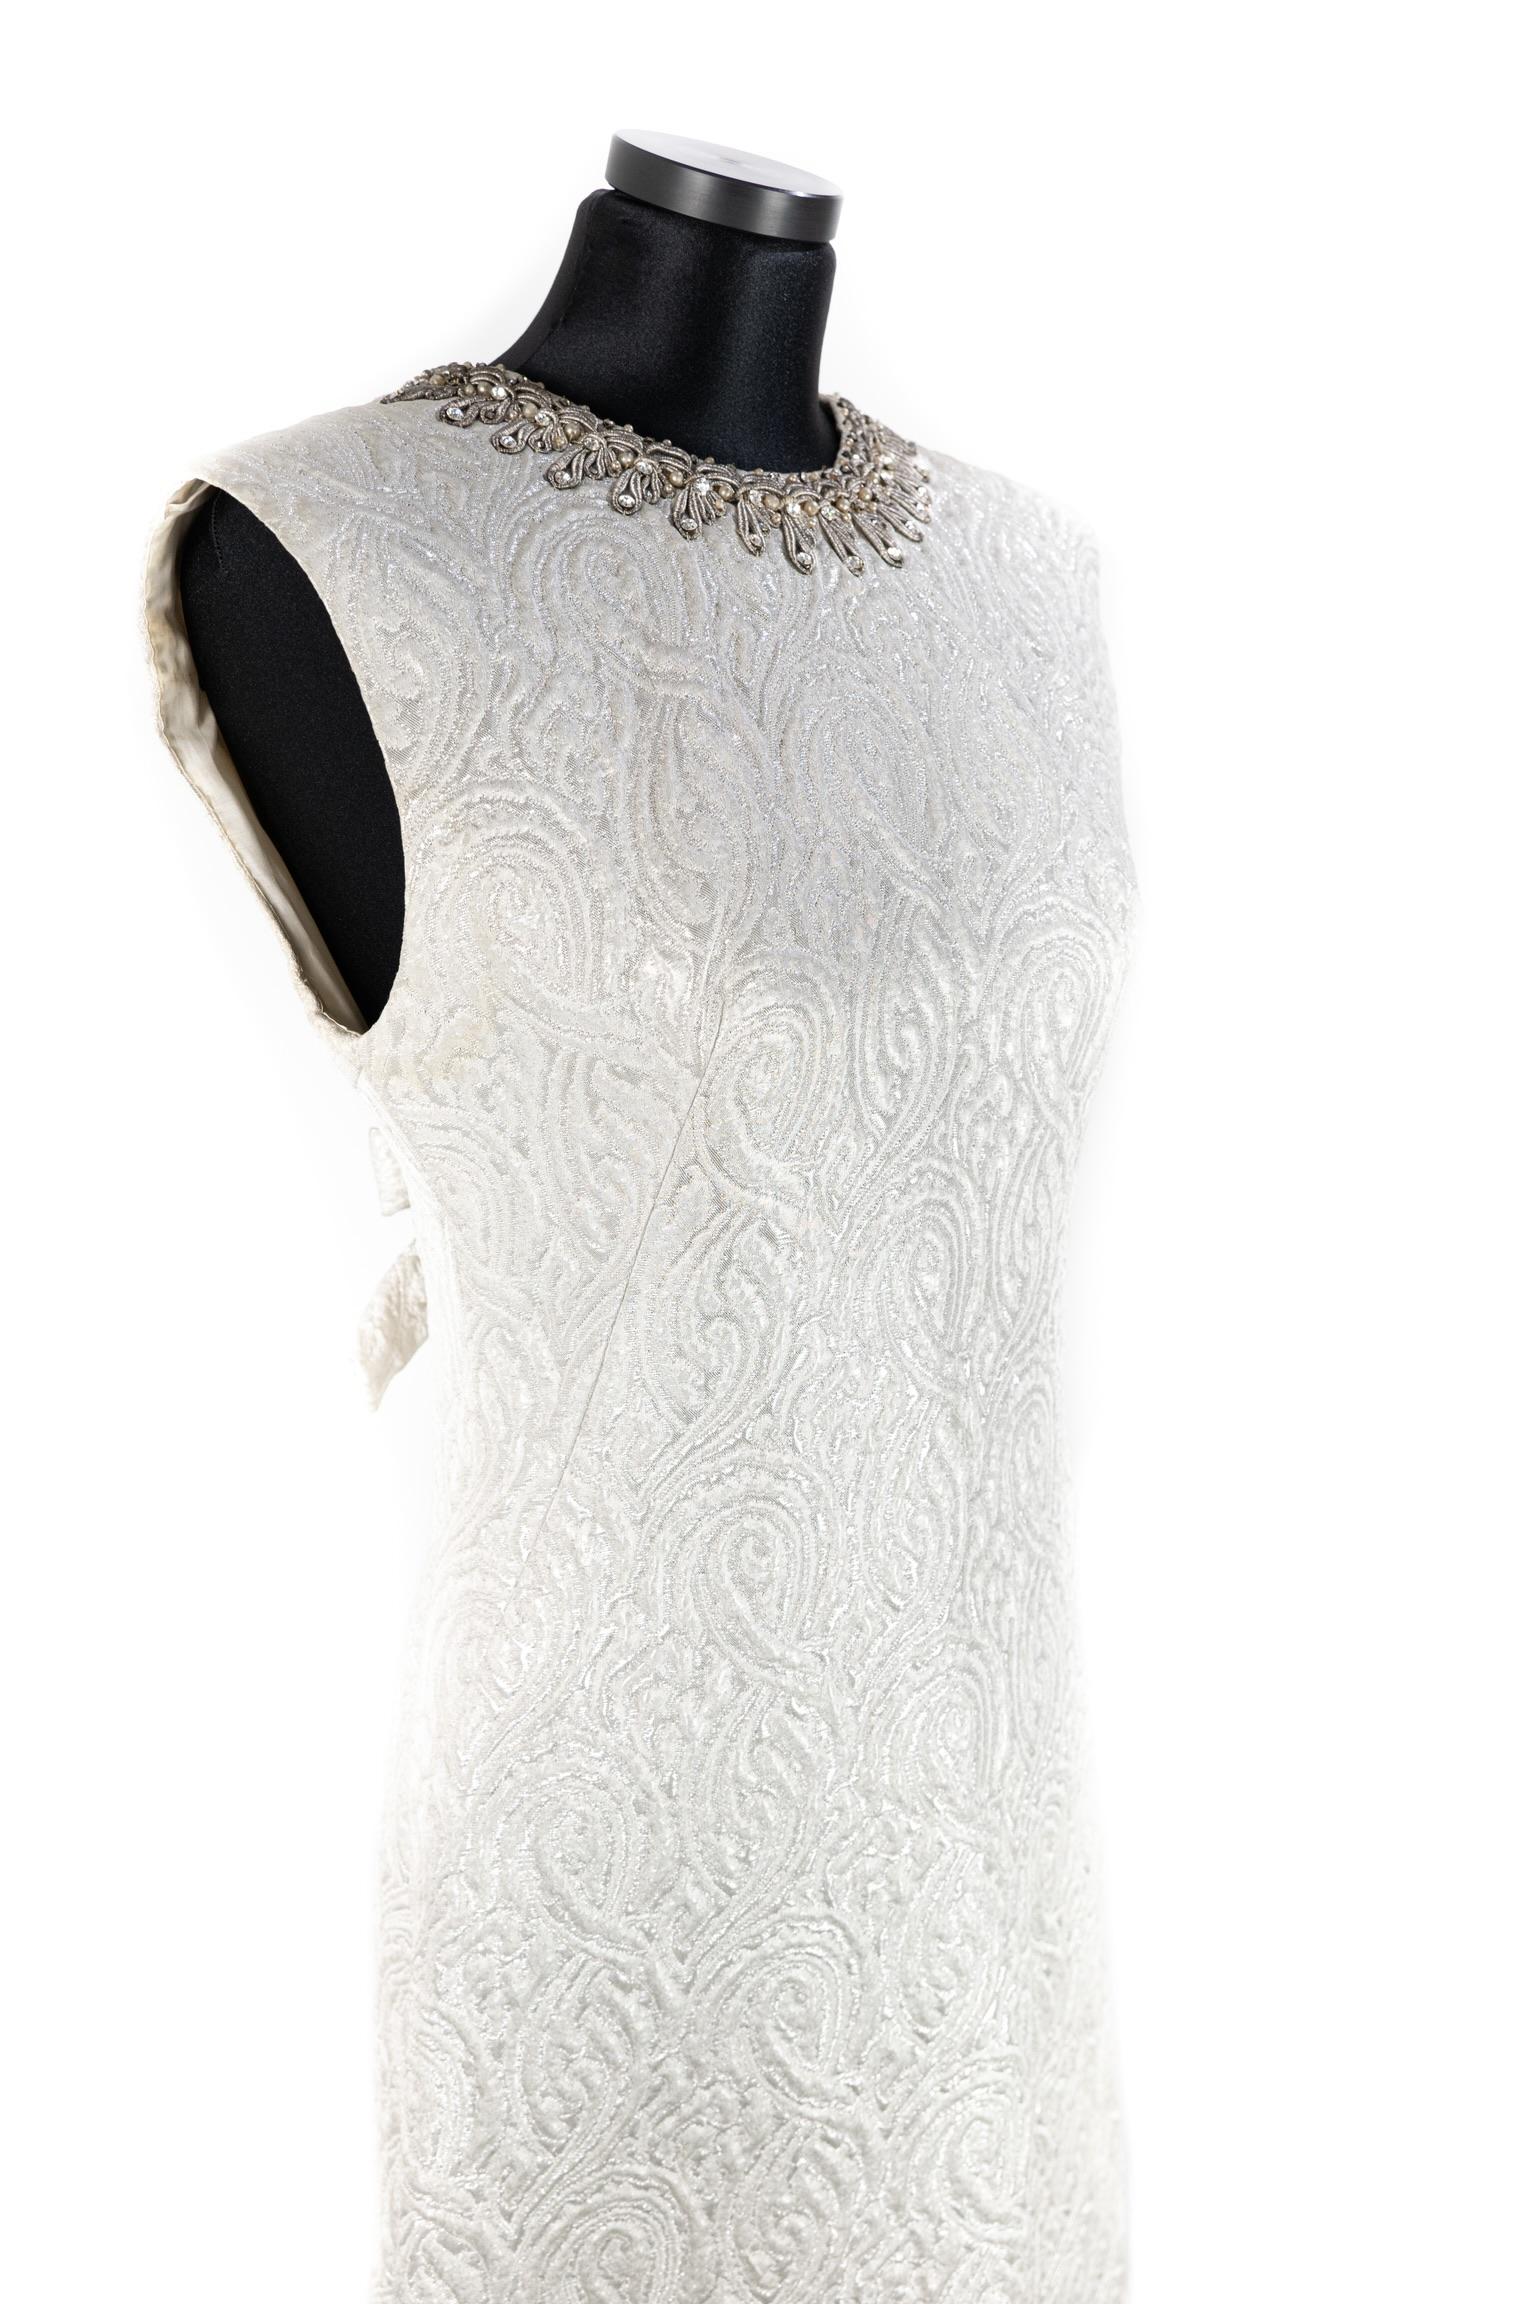 Vintage damask white Dress In Good Condition For Sale In Carnate, IT